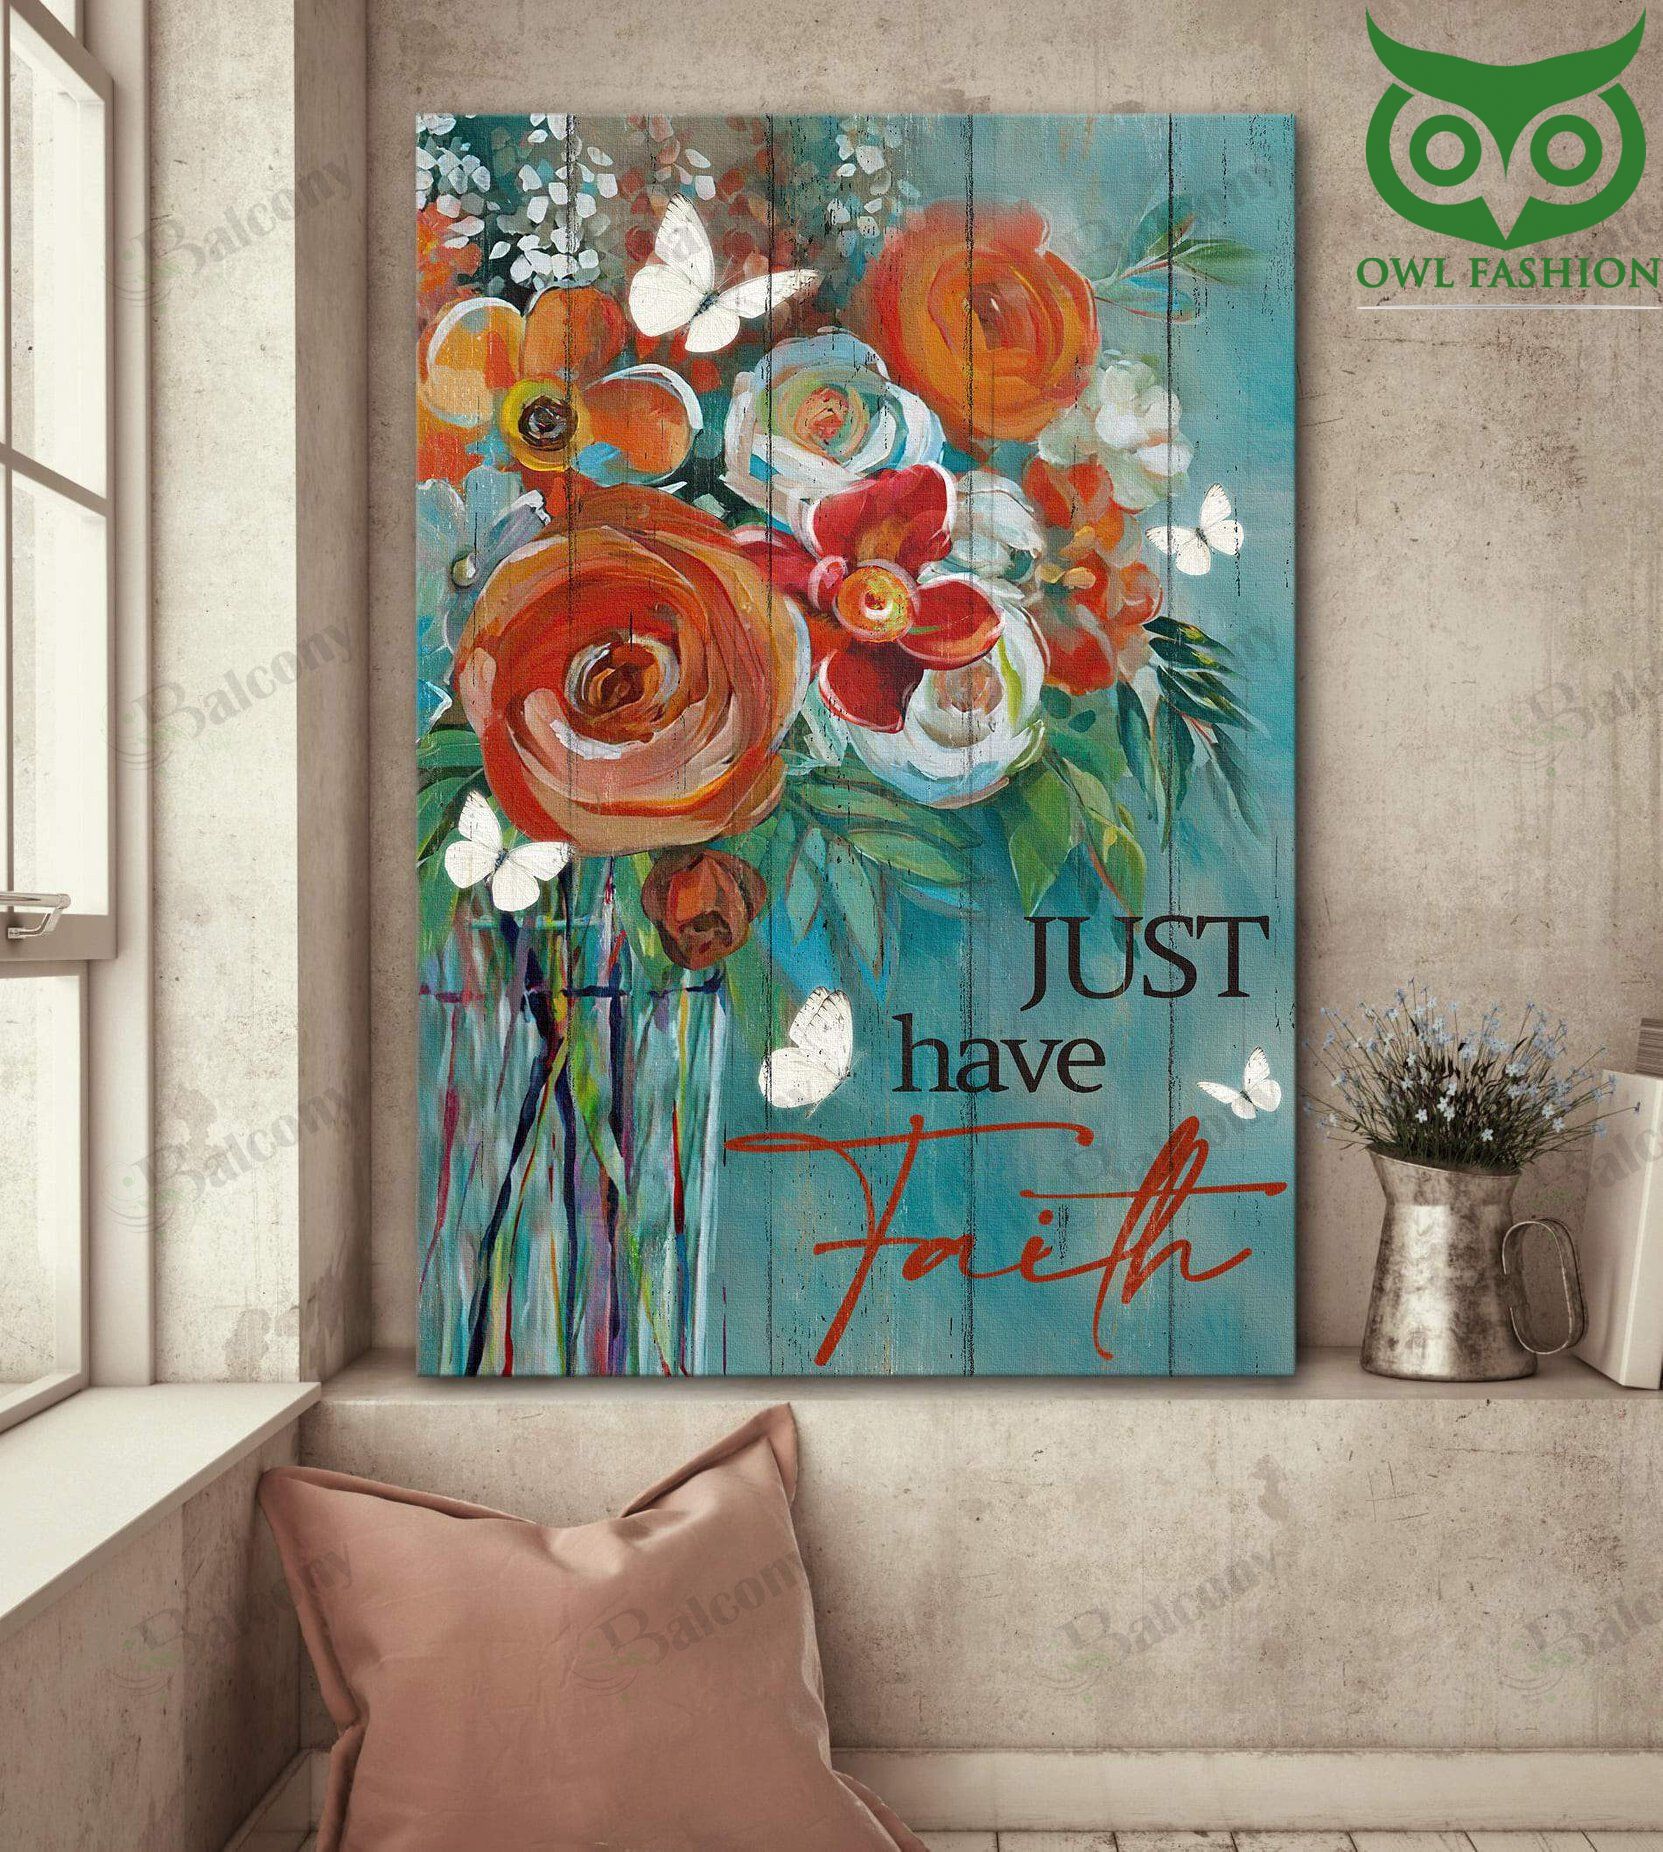 Jesus Just have a faith flower Poster